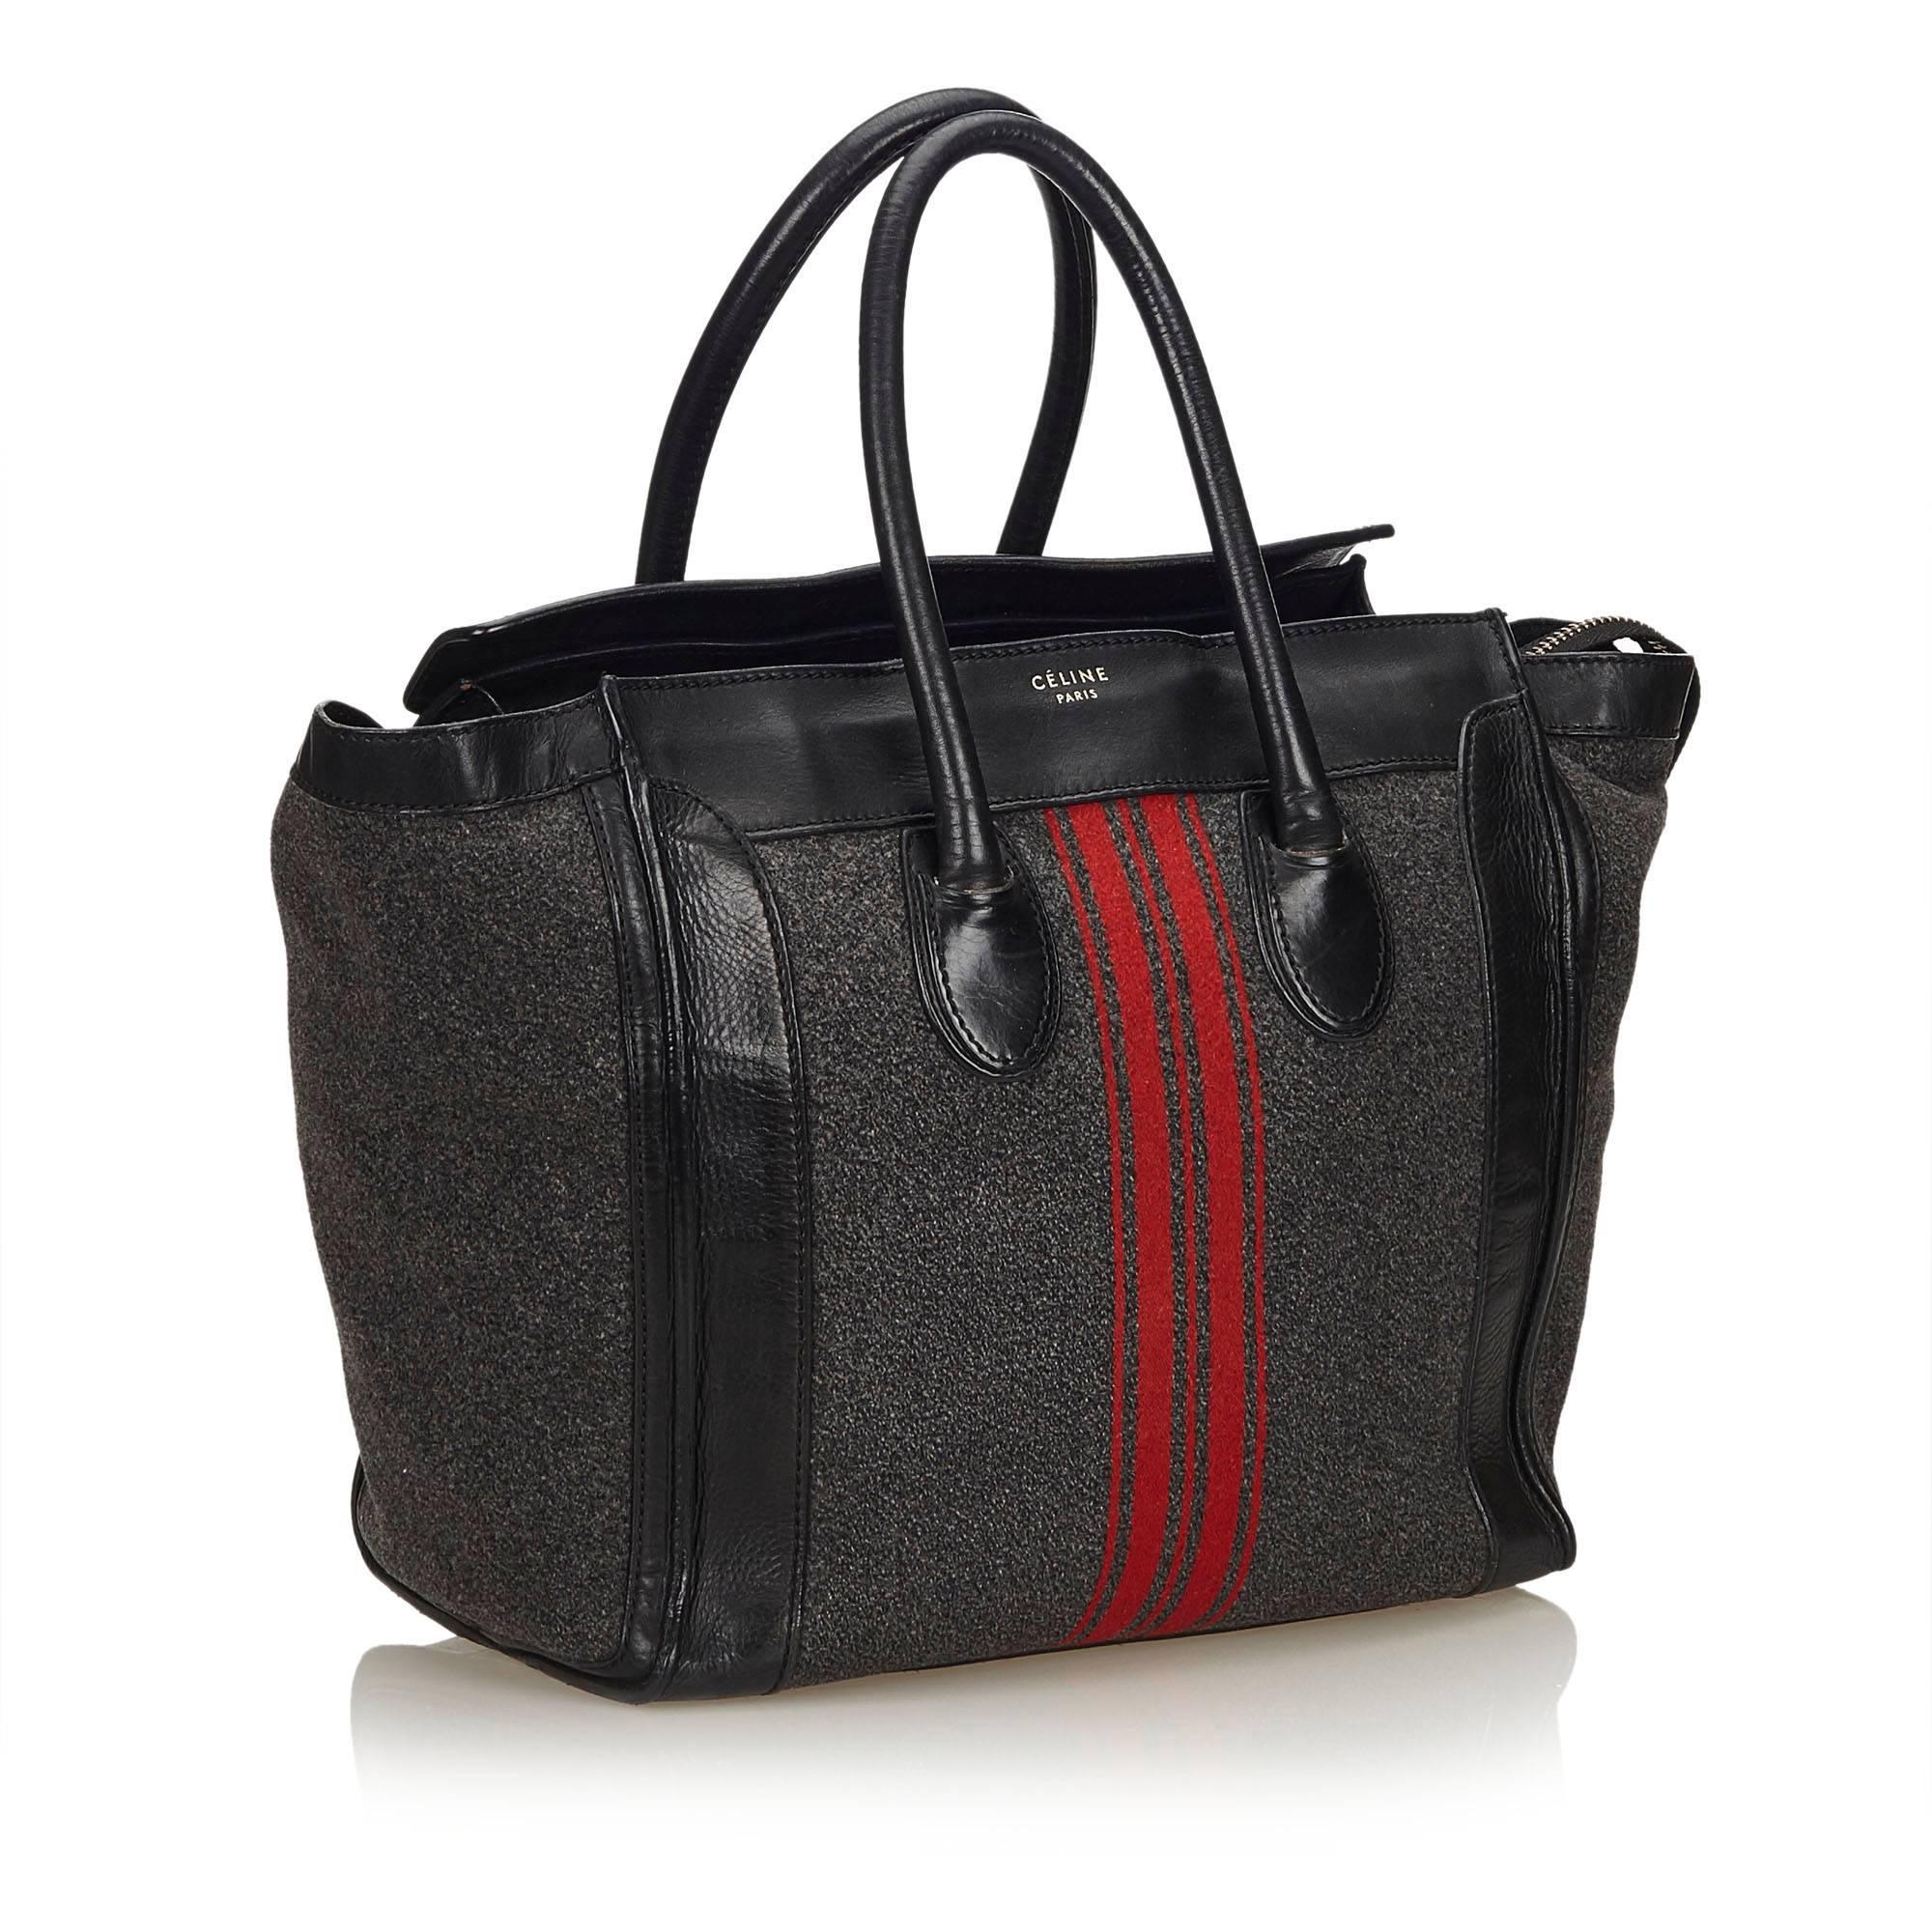 The Medium Luggage features a wool body with leather trim, stripes detail, rolled leather handles, top zip closure, and interior zip pocket. 

It carries a B condition rating.

Dimensions: 
Length 32 cm
Width 29 cm
Depth 18 cm
Hand Drop 13